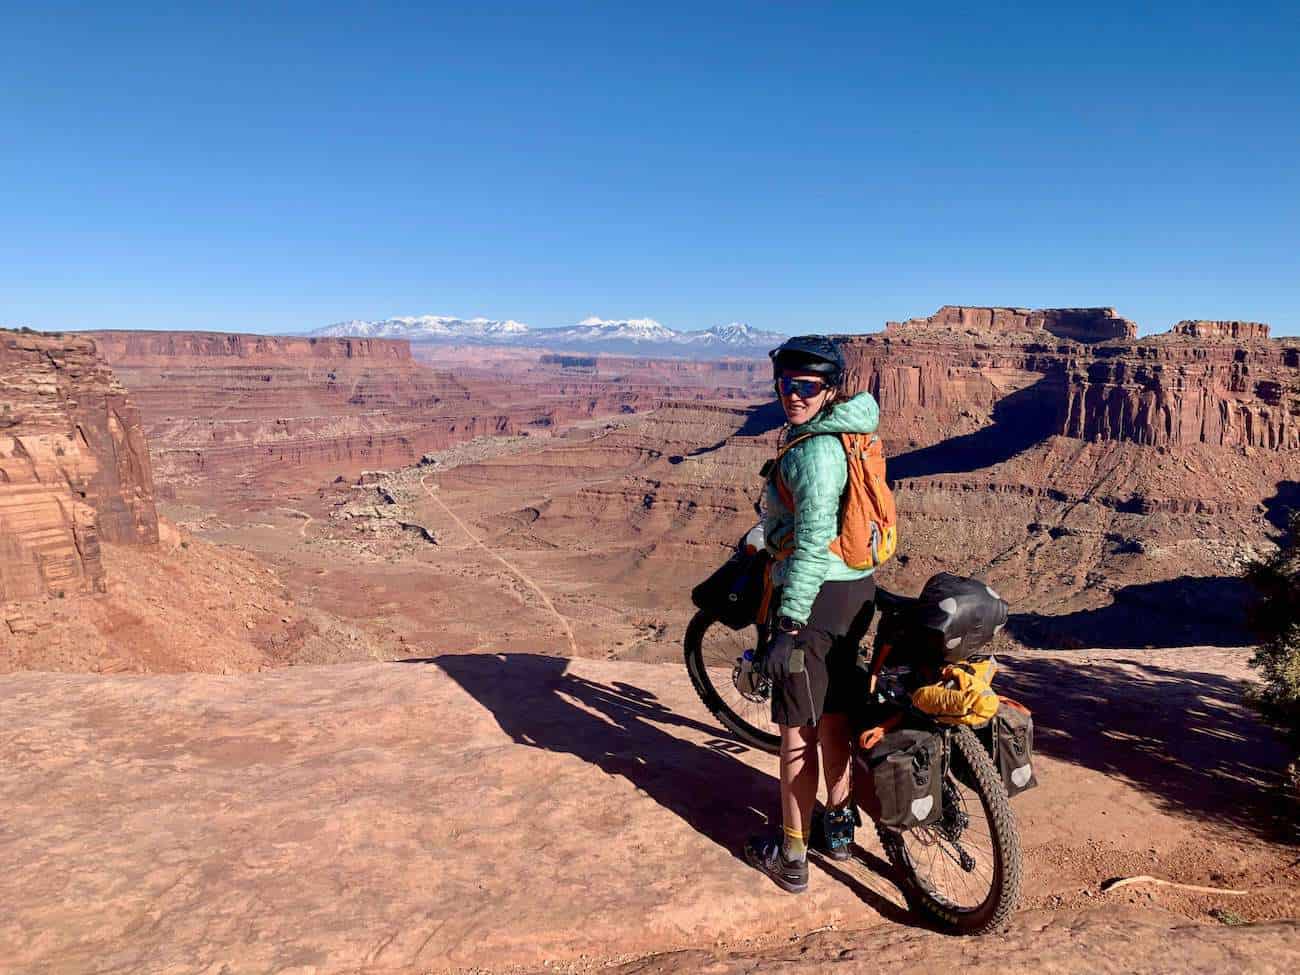 Becky standing next to fully loaded bikepacking bike on rock ledge overlooking Canyonlands National Park in Utah on White Rim Trail